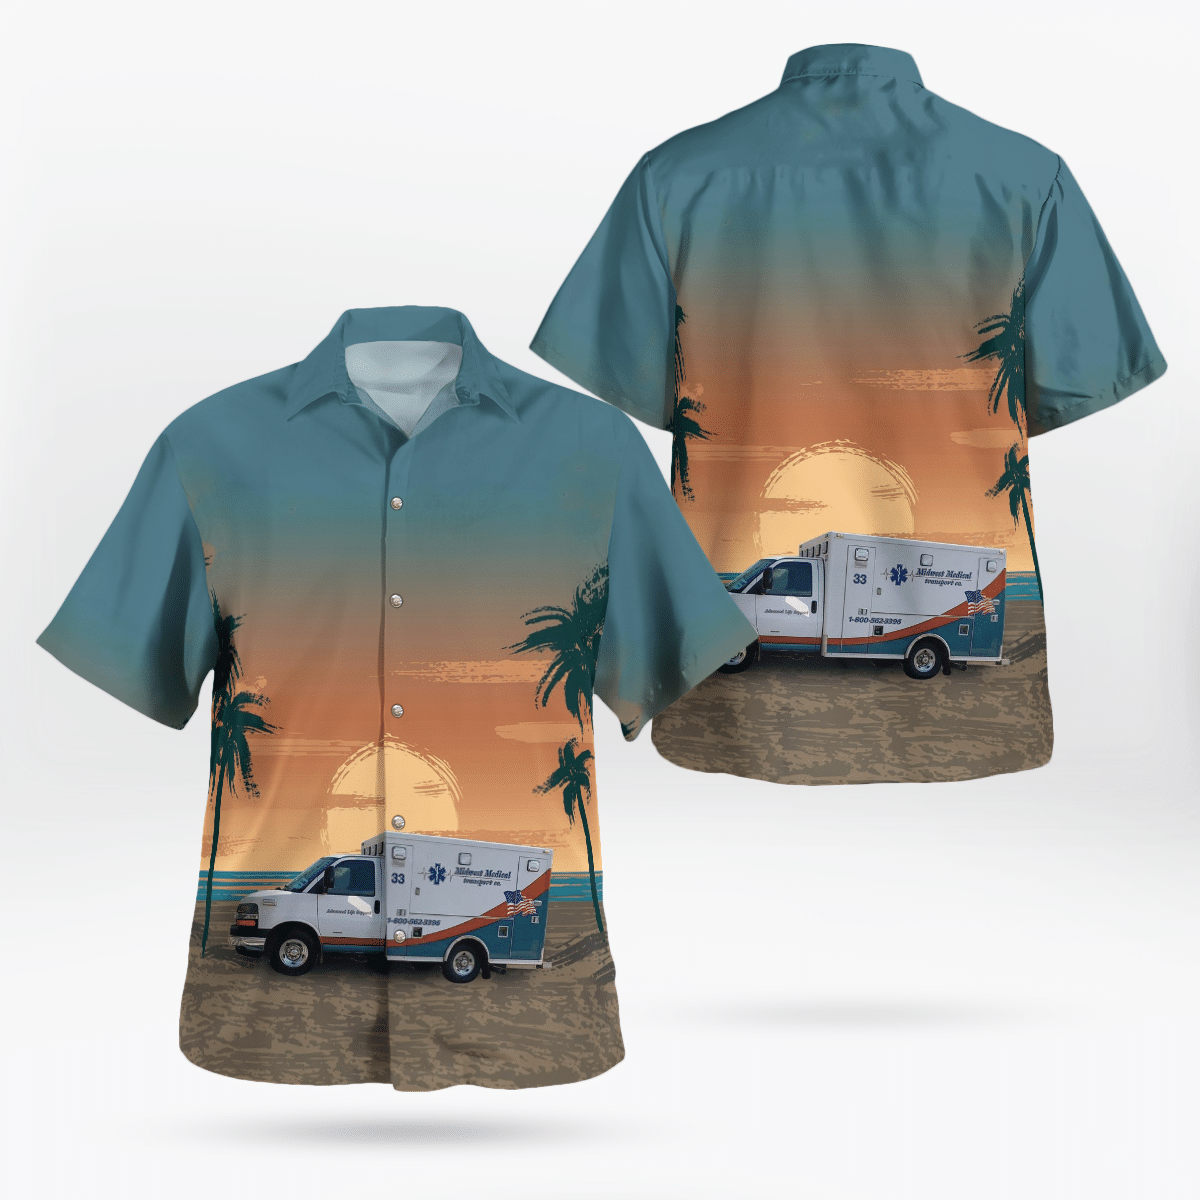 Shop now to find the perfect Hawaii Shirt for your hobby 187